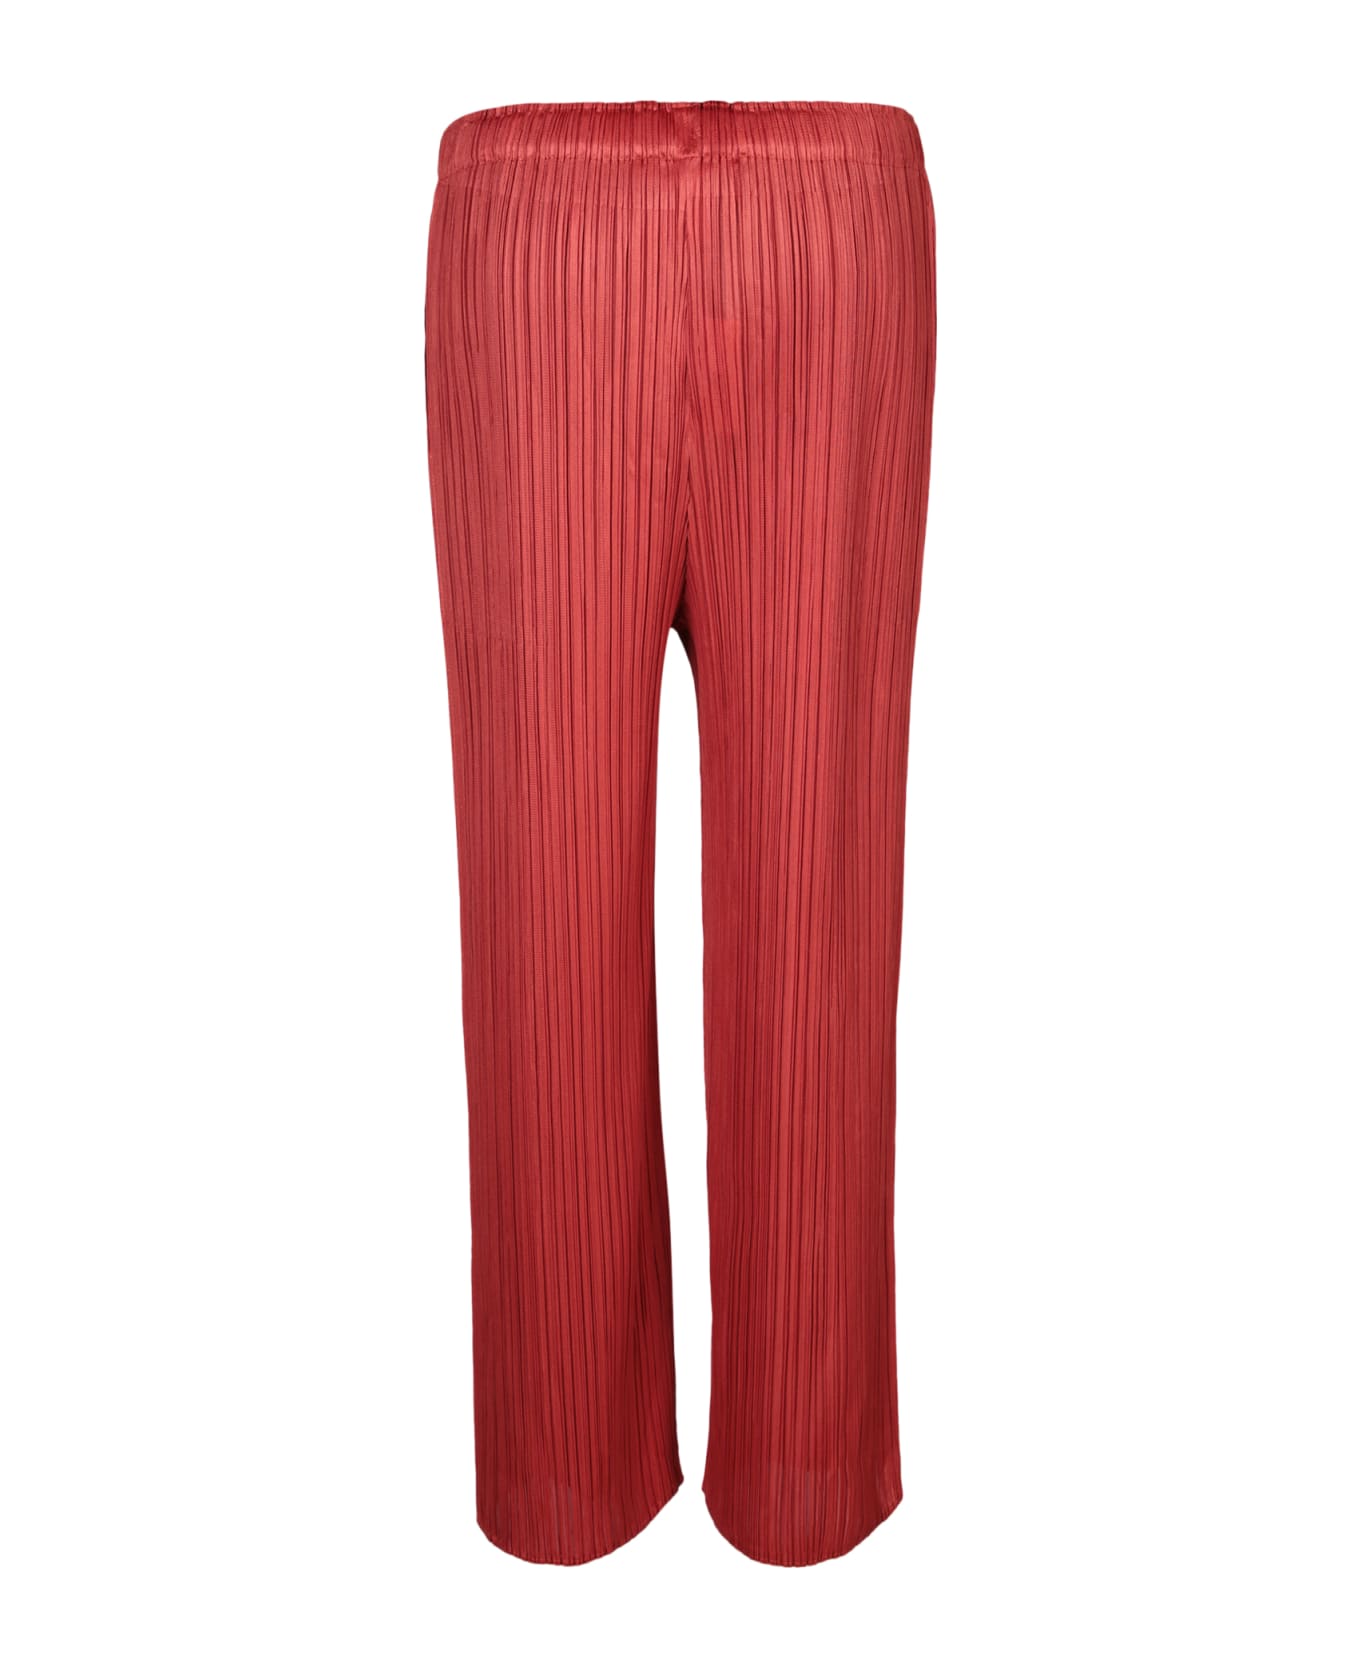 Issey Miyake Pleats Please Red Trousers - Red